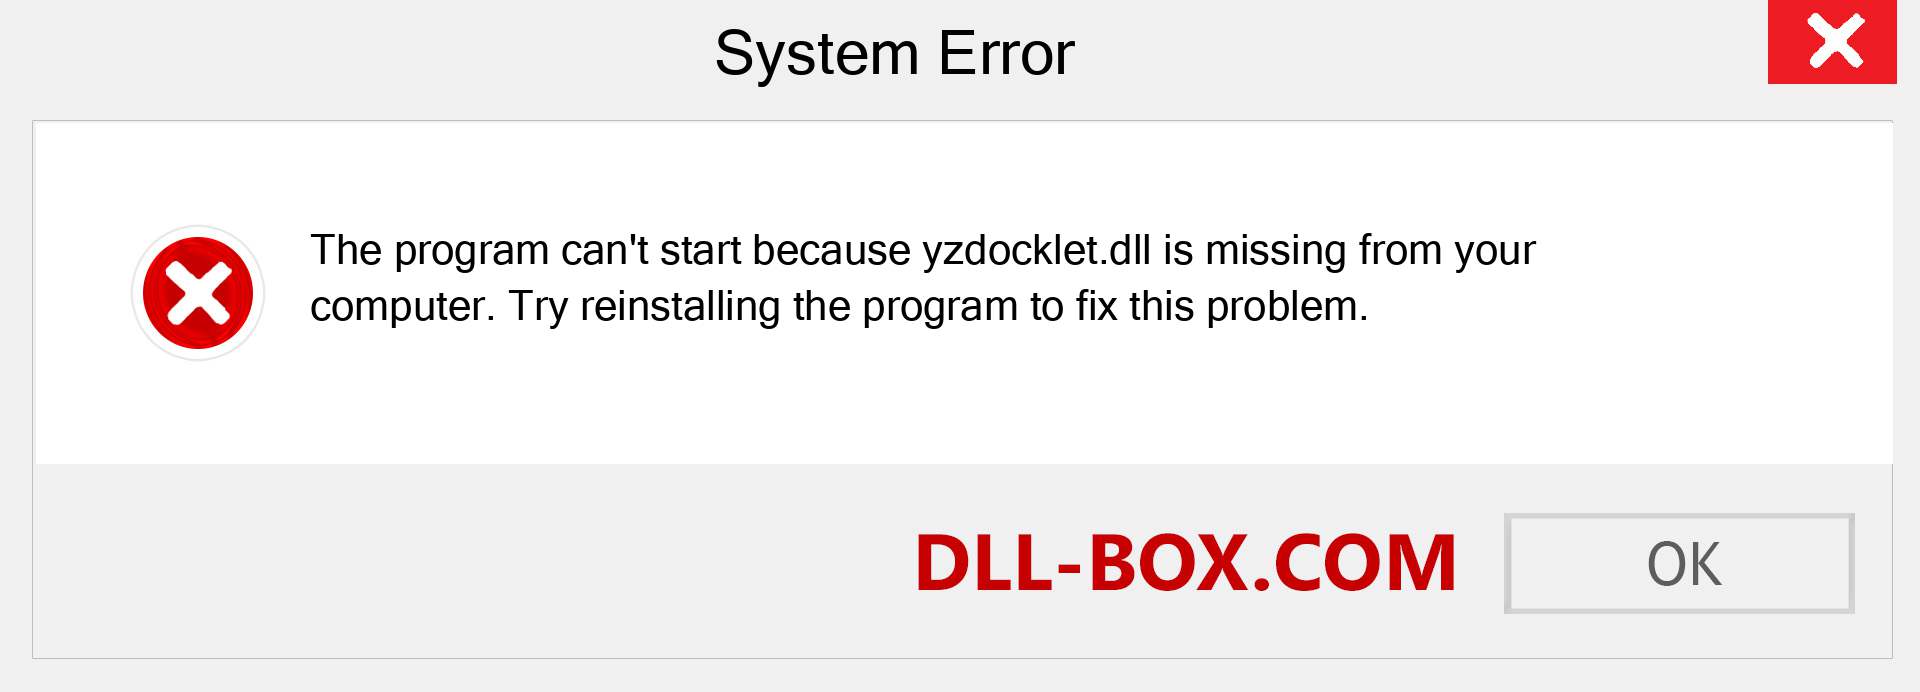  yzdocklet.dll file is missing?. Download for Windows 7, 8, 10 - Fix  yzdocklet dll Missing Error on Windows, photos, images